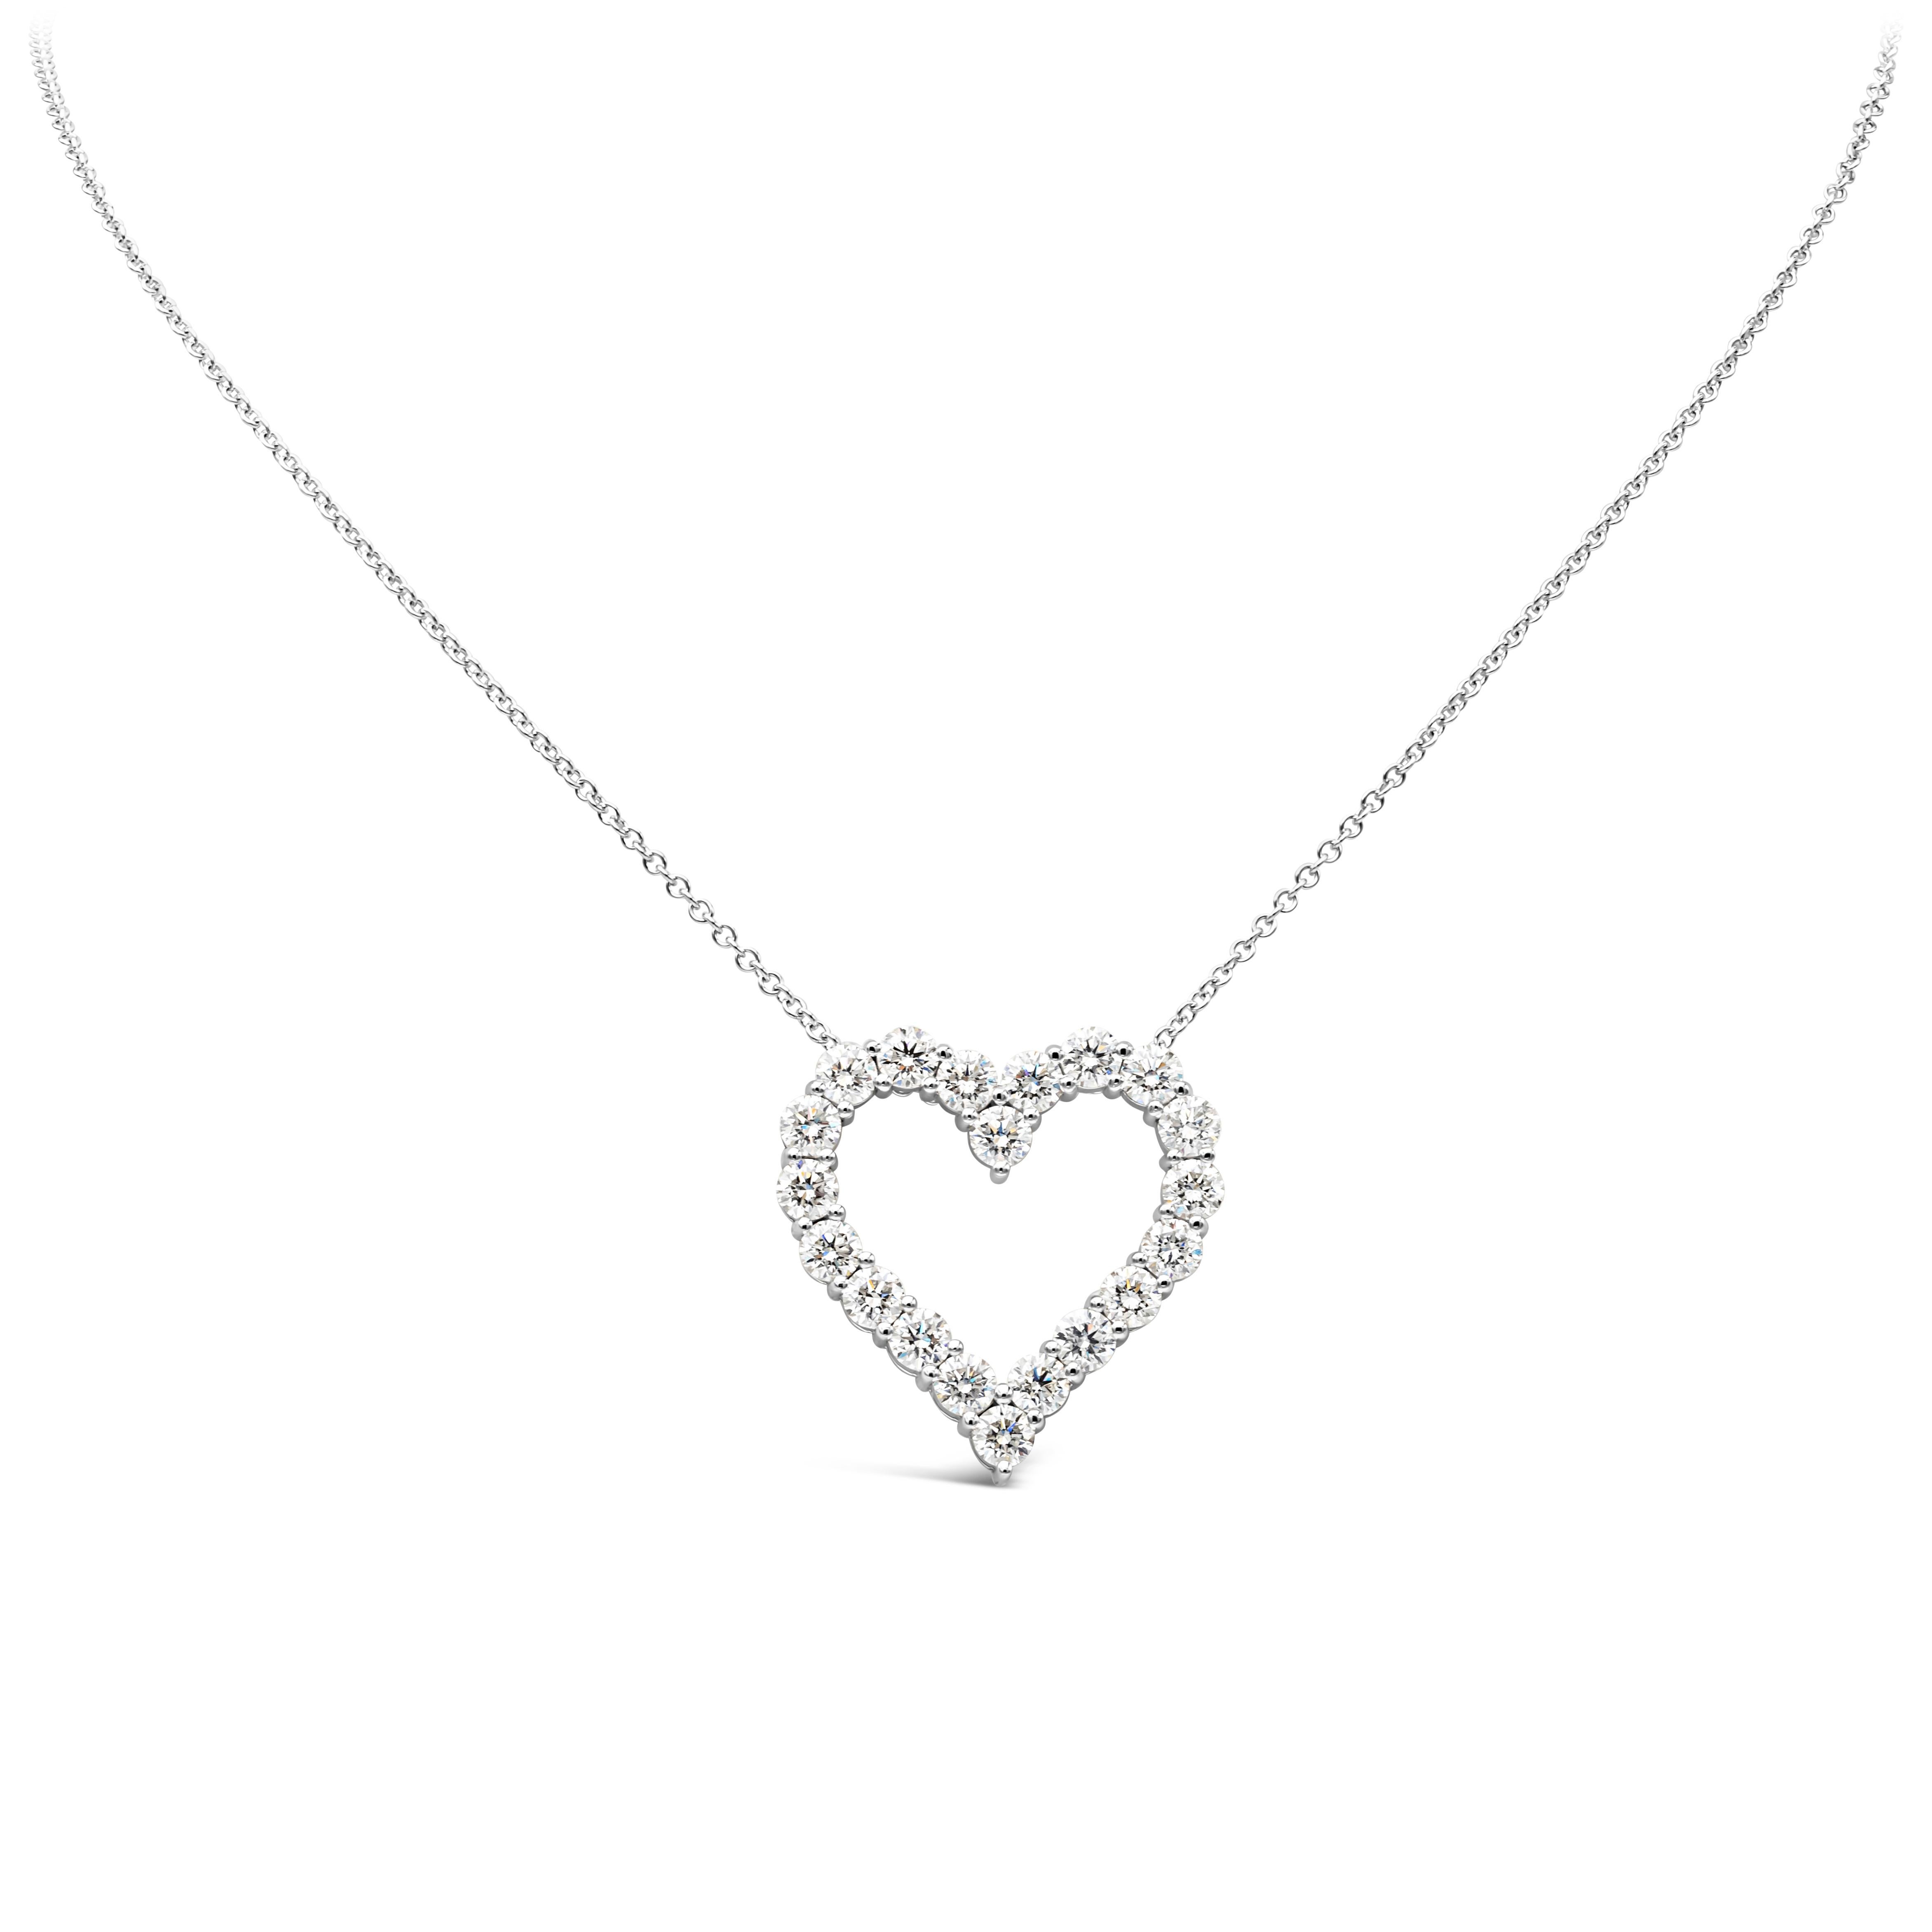 A simple and unique pendant necklace showcasing a row of round brilliant diamonds weighing 4.44 carats total, set in an open-work heart shape mounting made in 18k white gold and shared prong setting. Suspended on an adjustable white gold